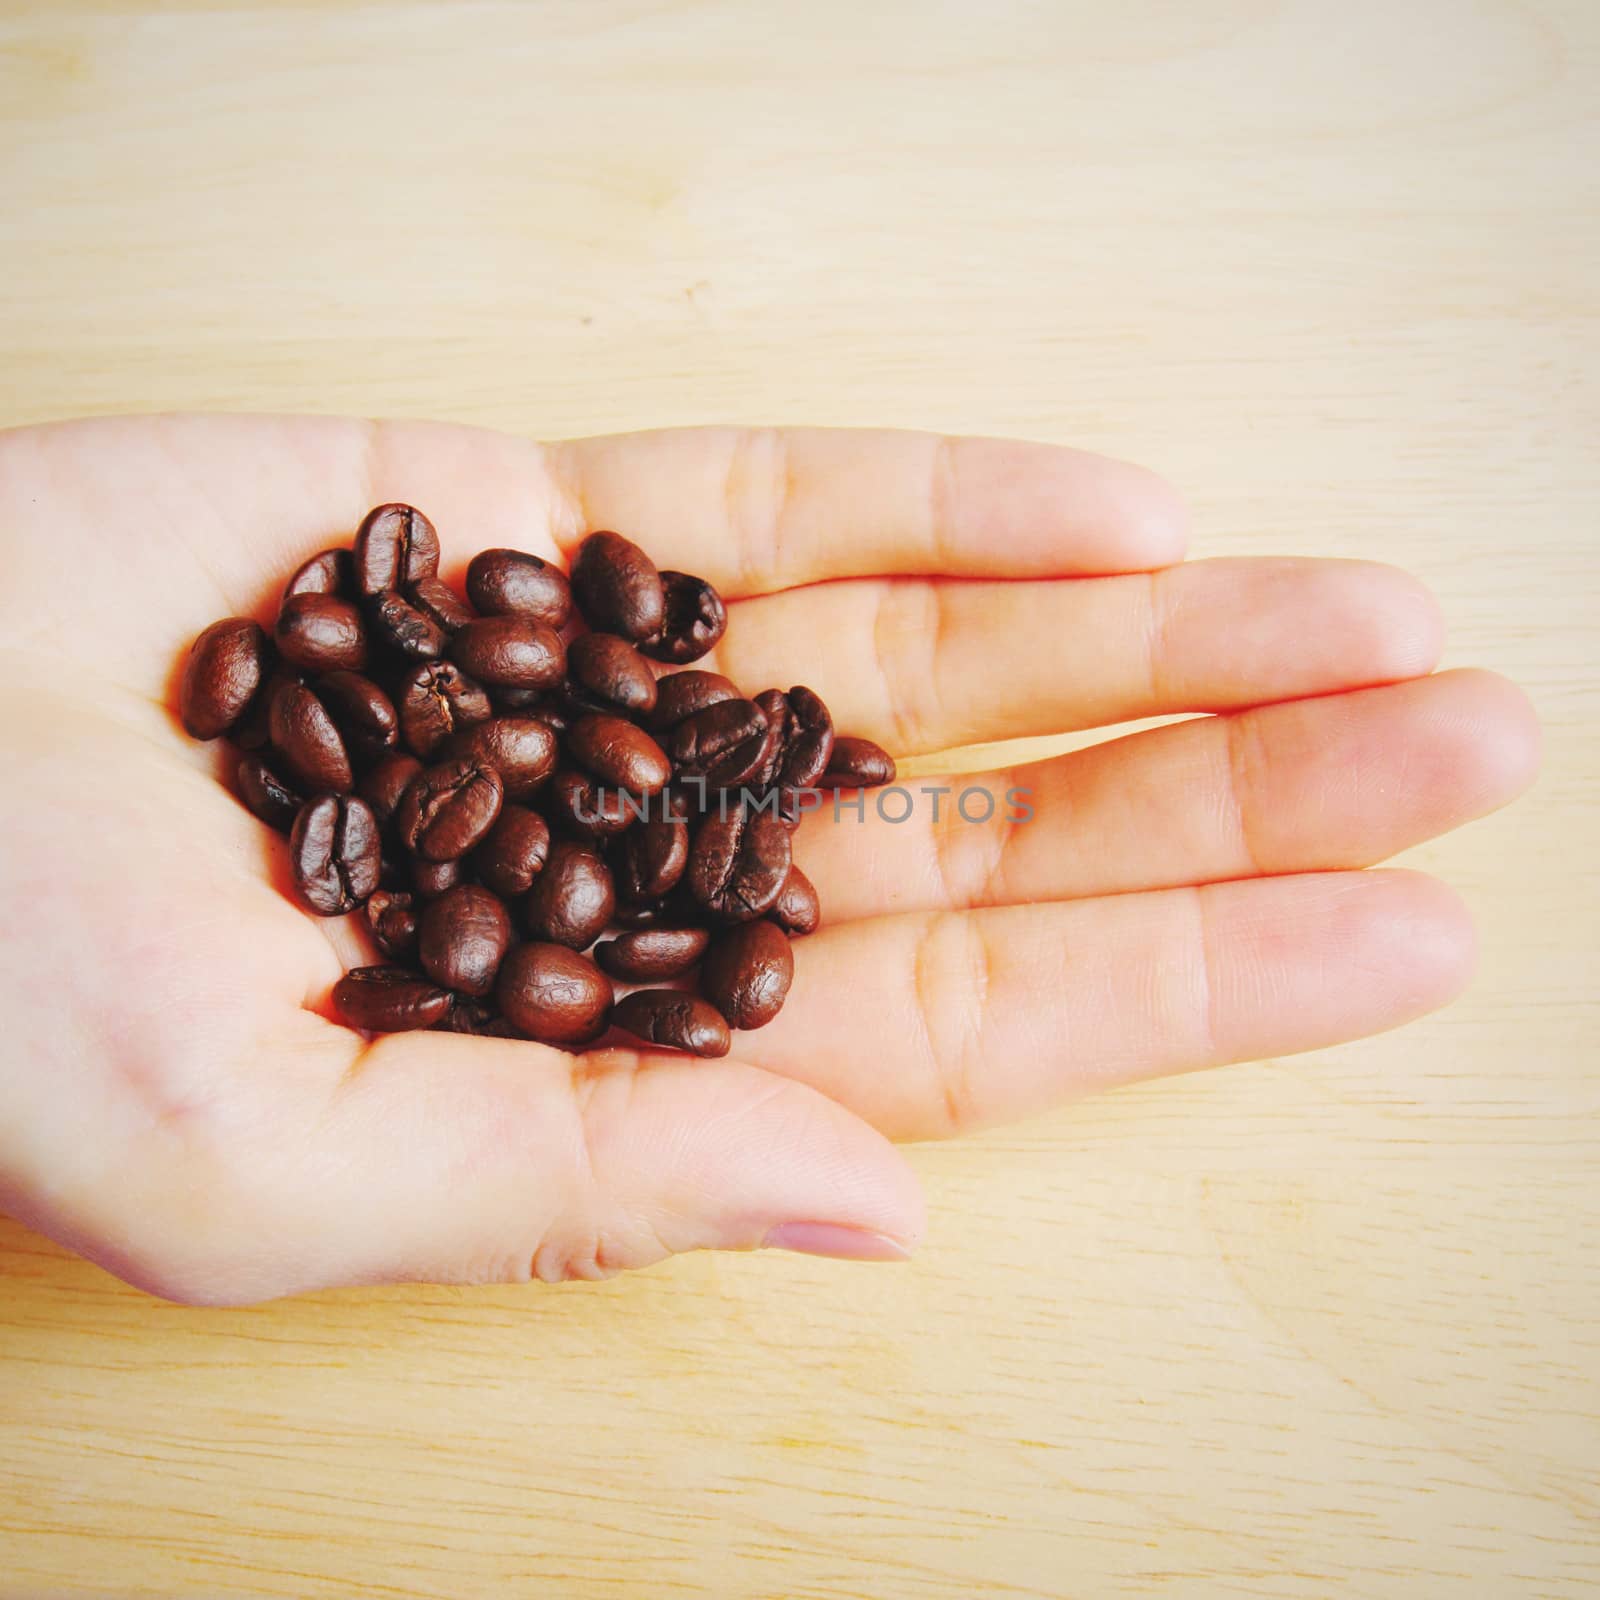 Close up of a hand full of coffee beans with retro filter effect by nuchylee